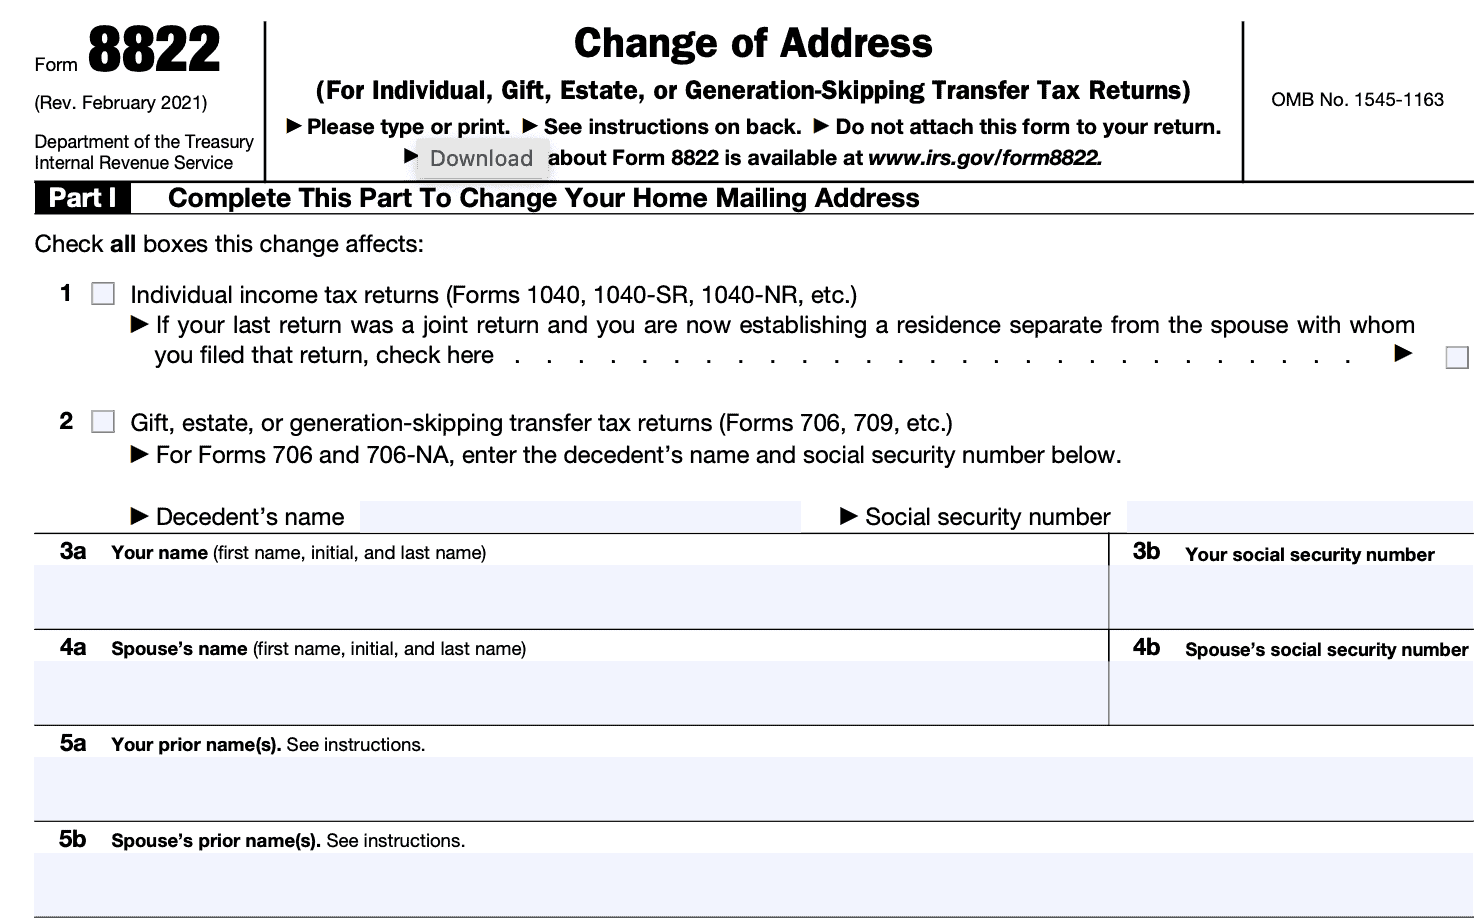 irs form 8822, change of address form, top